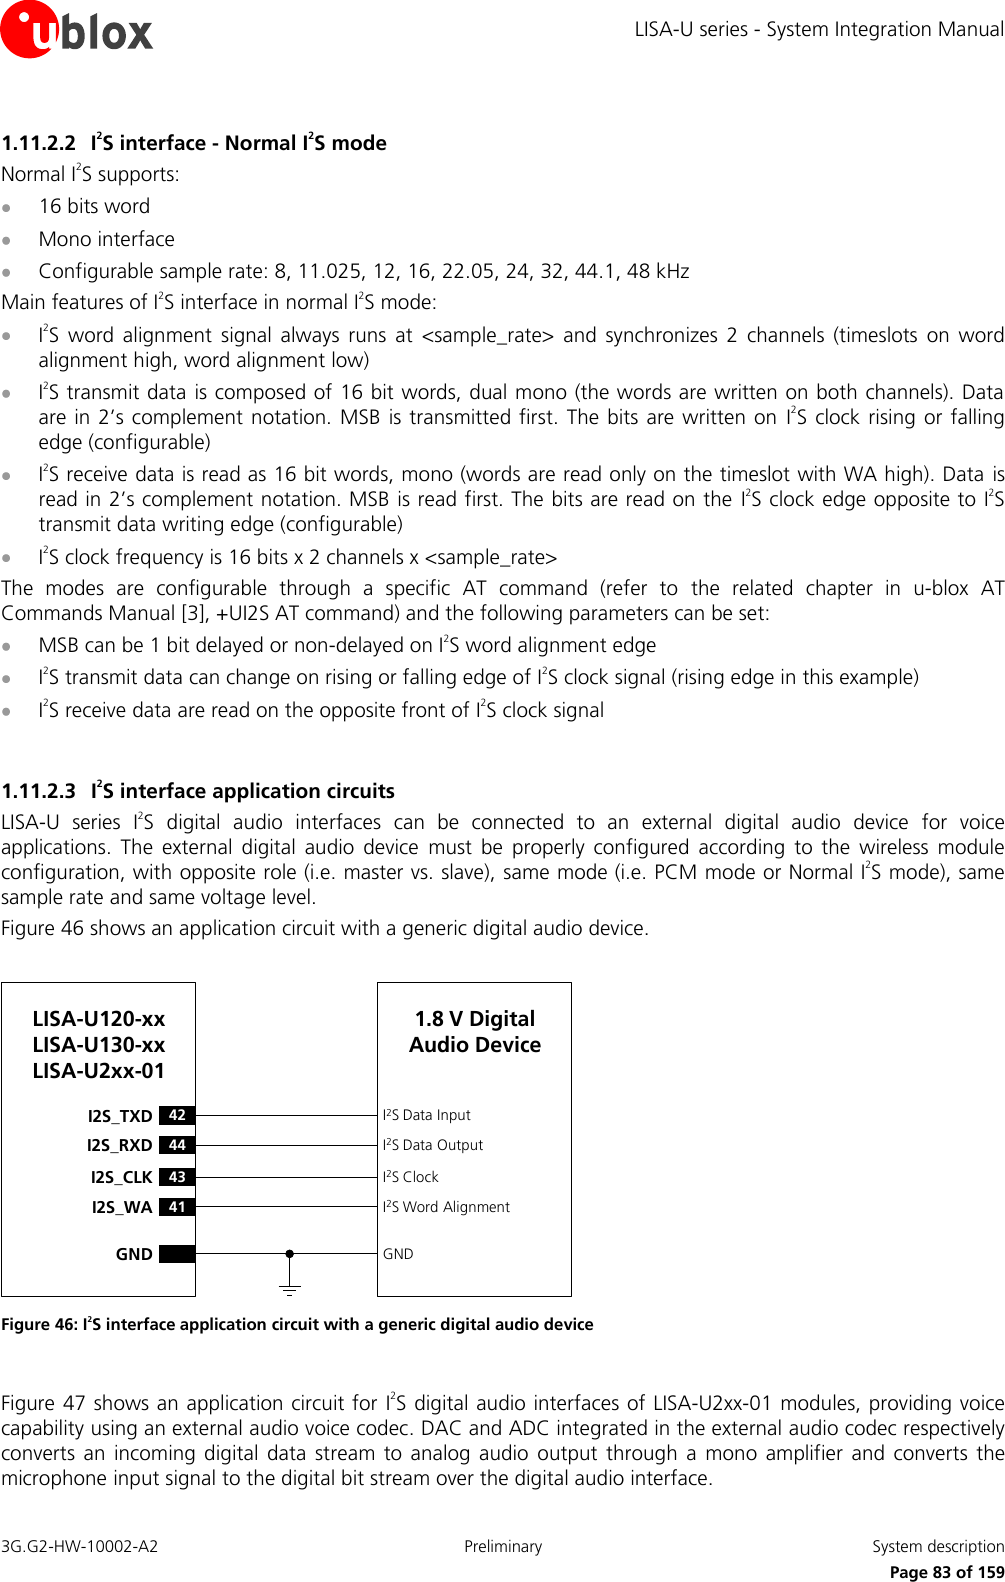 LISA-U series - System Integration Manual 3G.G2-HW-10002-A2  Preliminary  System description      Page 83 of 159 1.11.2.2 I2S interface - Normal I2S mode Normal I2S supports:  16 bits word  Mono interface  Configurable sample rate: 8, 11.025, 12, 16, 22.05, 24, 32, 44.1, 48 kHz Main features of I2S interface in normal I2S mode:  I2S  word  alignment  signal  always  runs  at  &lt;sample_rate&gt;  and  synchronizes  2  channels  (timeslots  on  word alignment high, word alignment low)  I2S transmit data  is composed of 16 bit words, dual mono (the words are written on both channels). Data are in 2’s complement notation. MSB  is transmitted  first.  The bits are  written on  I2S clock rising  or falling edge (configurable)  I2S receive data is read as 16 bit words, mono (words are read only on the timeslot with WA high). Data  is read in 2’s complement notation. MSB is read first. The bits are read on the  I2S clock edge opposite to I2S transmit data writing edge (configurable)  I2S clock frequency is 16 bits x 2 channels x &lt;sample_rate&gt; The  modes  are  configurable  through  a  specific  AT  command  (refer  to  the  related  chapter  in  u-blox  AT Commands Manual [3], +UI2S AT command) and the following parameters can be set:  MSB can be 1 bit delayed or non-delayed on I2S word alignment edge  I2S transmit data can change on rising or falling edge of I2S clock signal (rising edge in this example)  I2S receive data are read on the opposite front of I2S clock signal  1.11.2.3 I2S interface application circuits LISA-U  series  I2S  digital  audio  interfaces  can  be  connected  to  an  external  digital  audio  device  for  voice applications.  The  external  digital  audio  device  must  be  properly  configured  according  to  the  wireless  module configuration, with opposite role (i.e. master vs. slave), same mode (i.e. PCM mode or Normal I2S mode), same sample rate and same voltage level. Figure 46 shows an application circuit with a generic digital audio device.  43I2S_CLK41I2S_WAI2S ClockI2S Word AlignmentLISA-U120-xxLISA-U130-xxLISA-U2xx-0142I2S_TXD44I2S_RXDI2S Data InputI2S Data OutputGND GND1.8 V Digital Audio Device Figure 46: I2S interface application circuit with a generic digital audio device  Figure 47 shows an application circuit for  I2S digital audio interfaces of LISA-U2xx-01 modules, providing voice capability using an external audio voice codec. DAC and ADC integrated in the external audio codec respectively converts  an  incoming digital  data stream  to analog  audio  output  through a  mono  amplifier  and converts  the microphone input signal to the digital bit stream over the digital audio interface. 